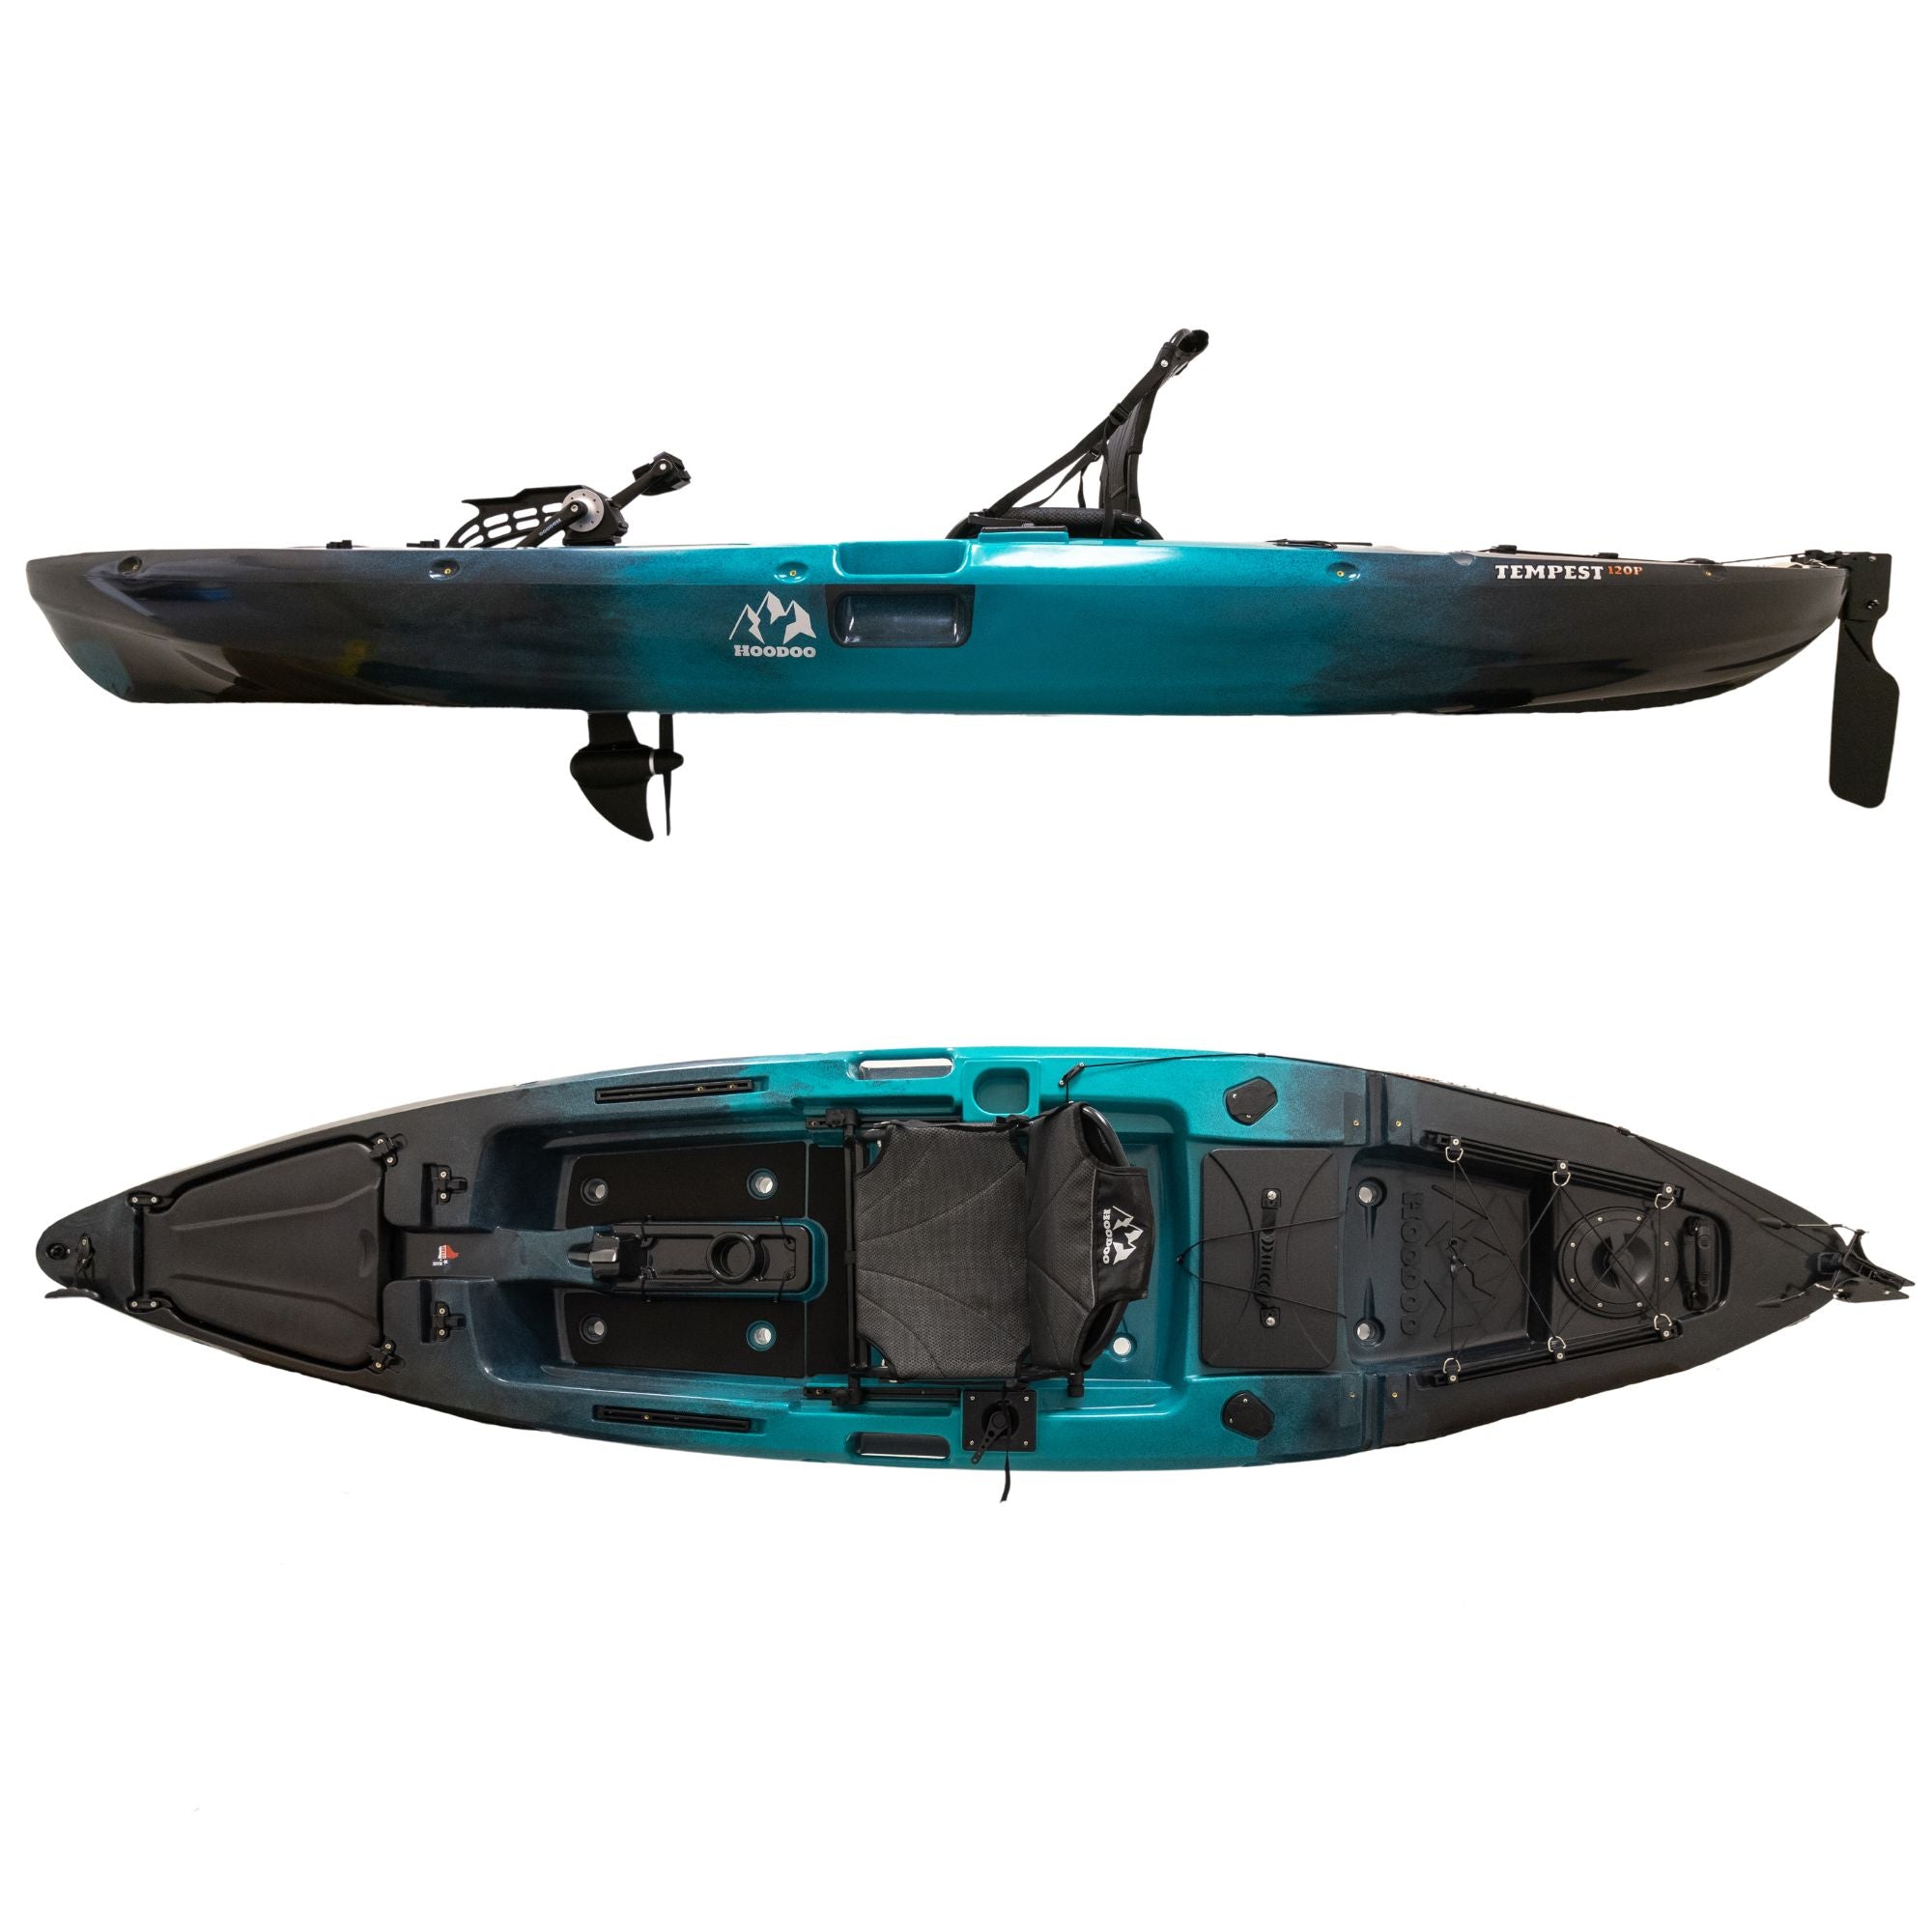 50% 0FF New Affordable Pedal Drive Kayak for a Limited Time - Meet the  Nomad 